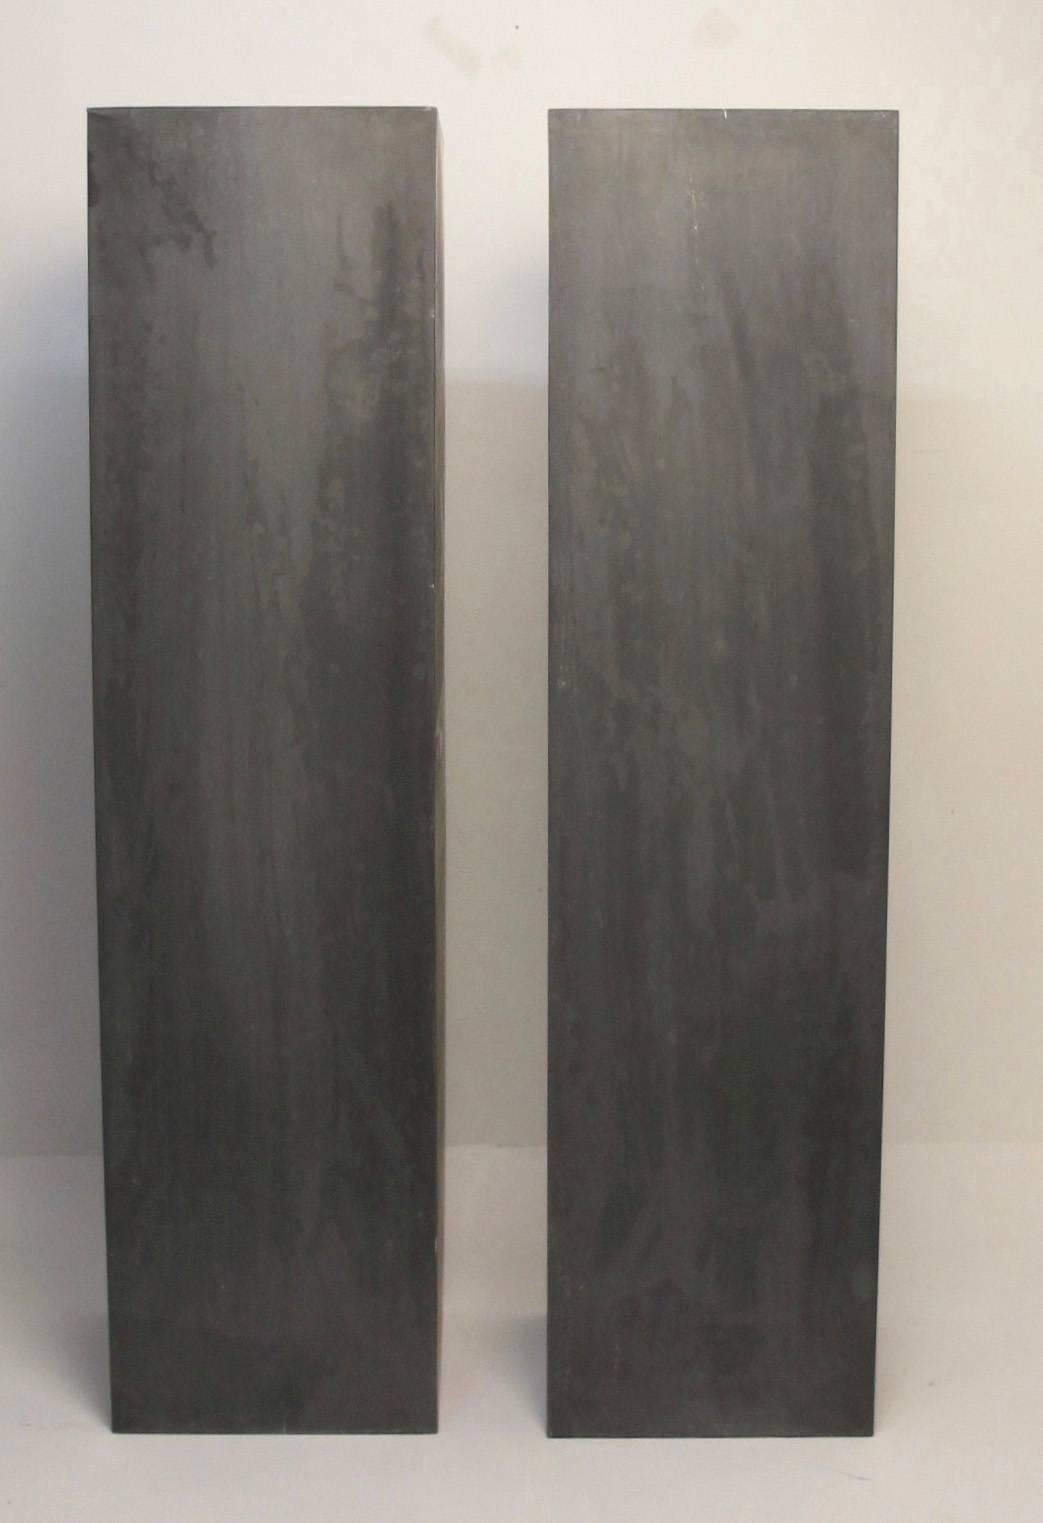 A large high quality pair of architectural zinc pedestals.